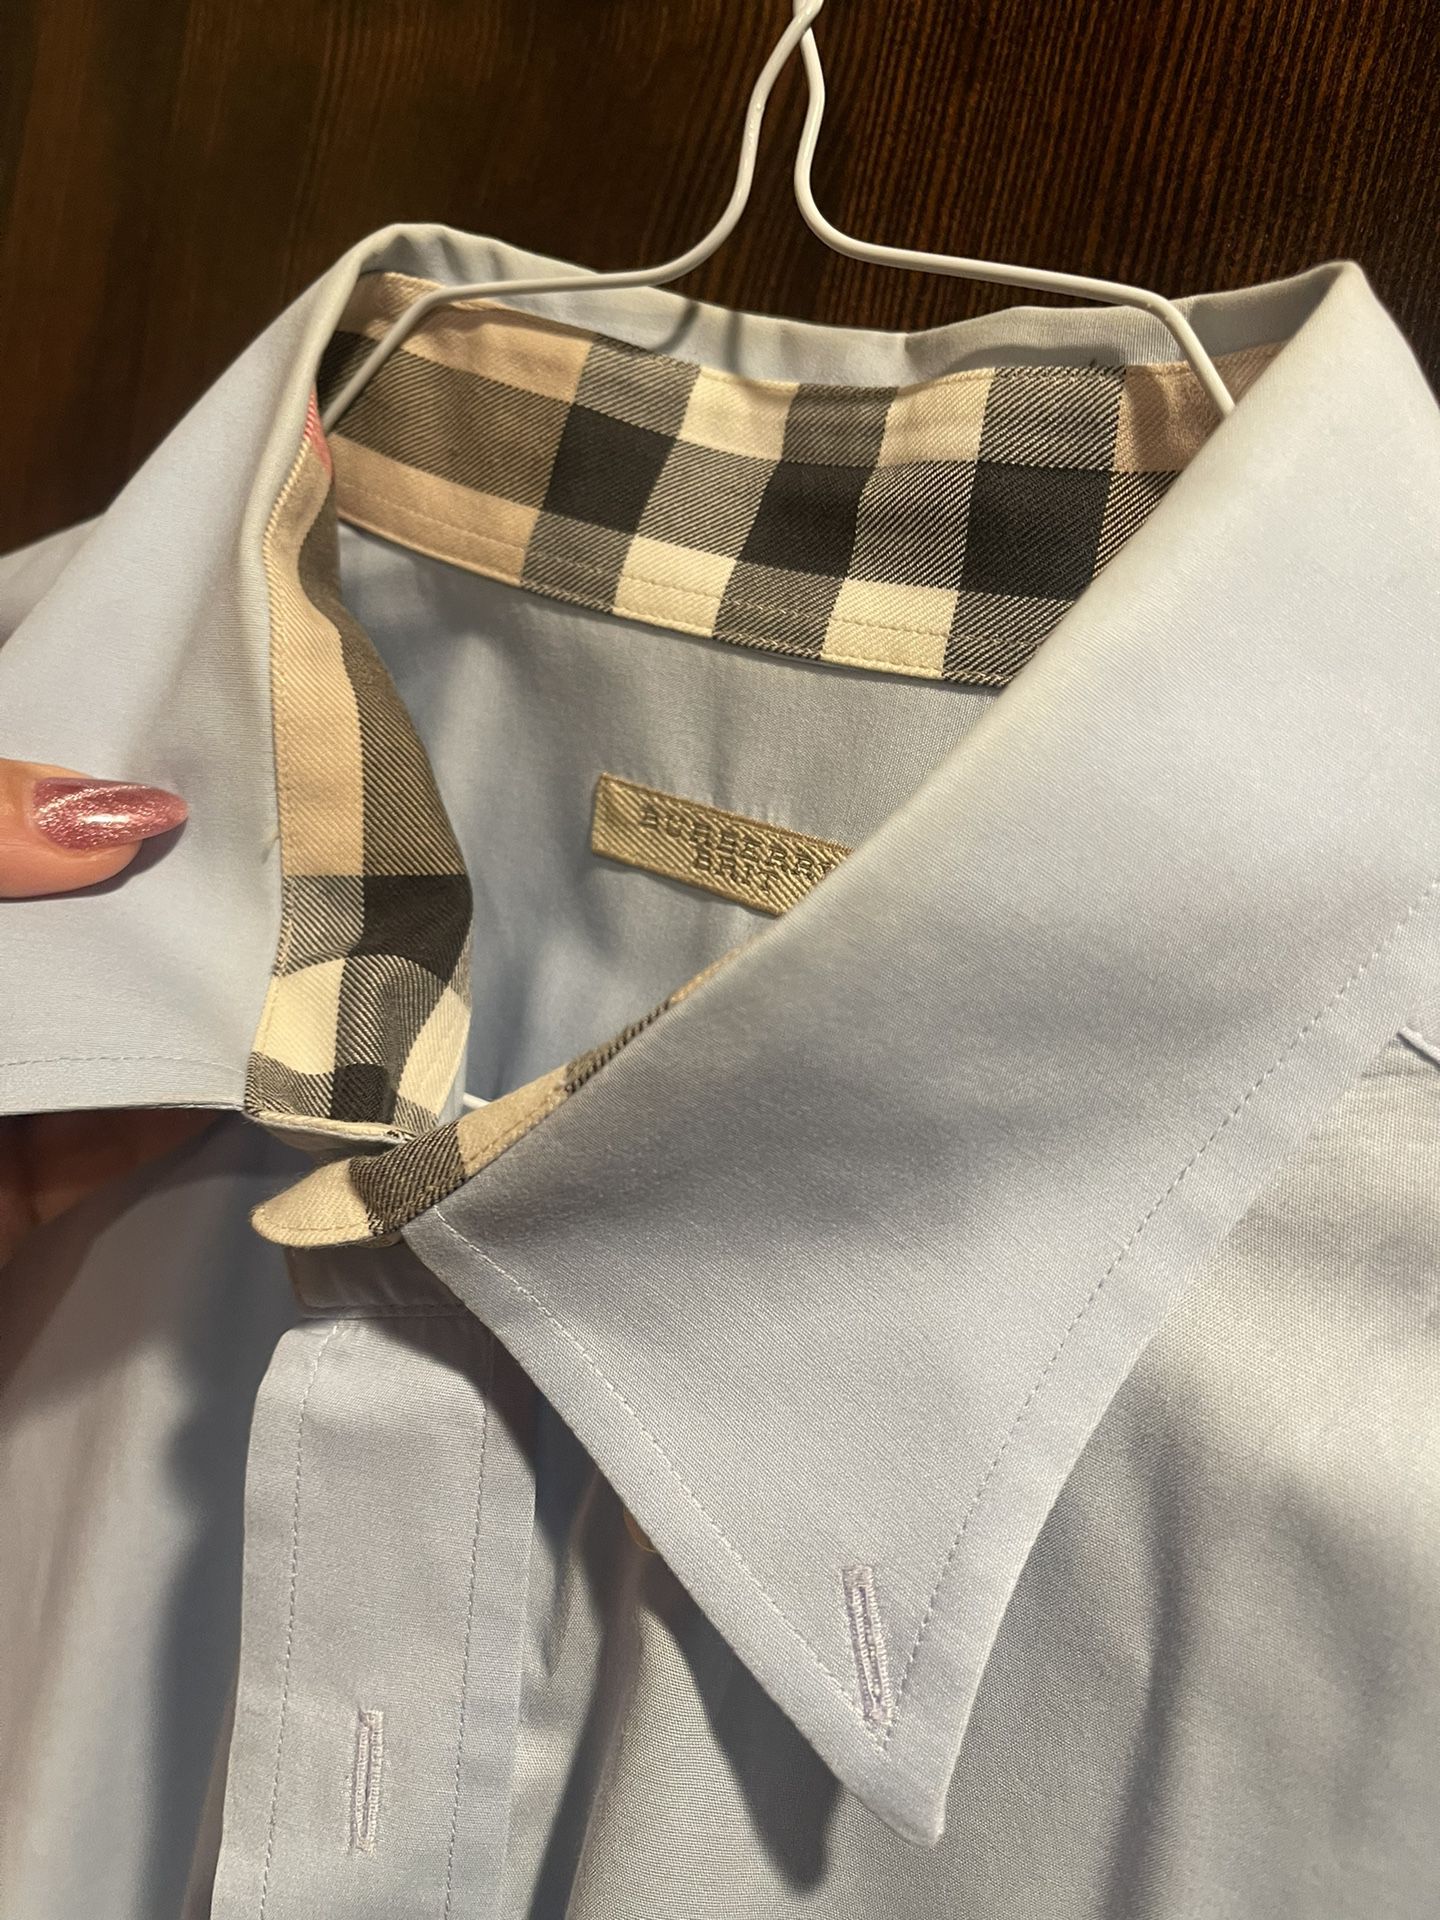 Authentic Burberry Dress Shirt In Awesome Condition For Only $250 